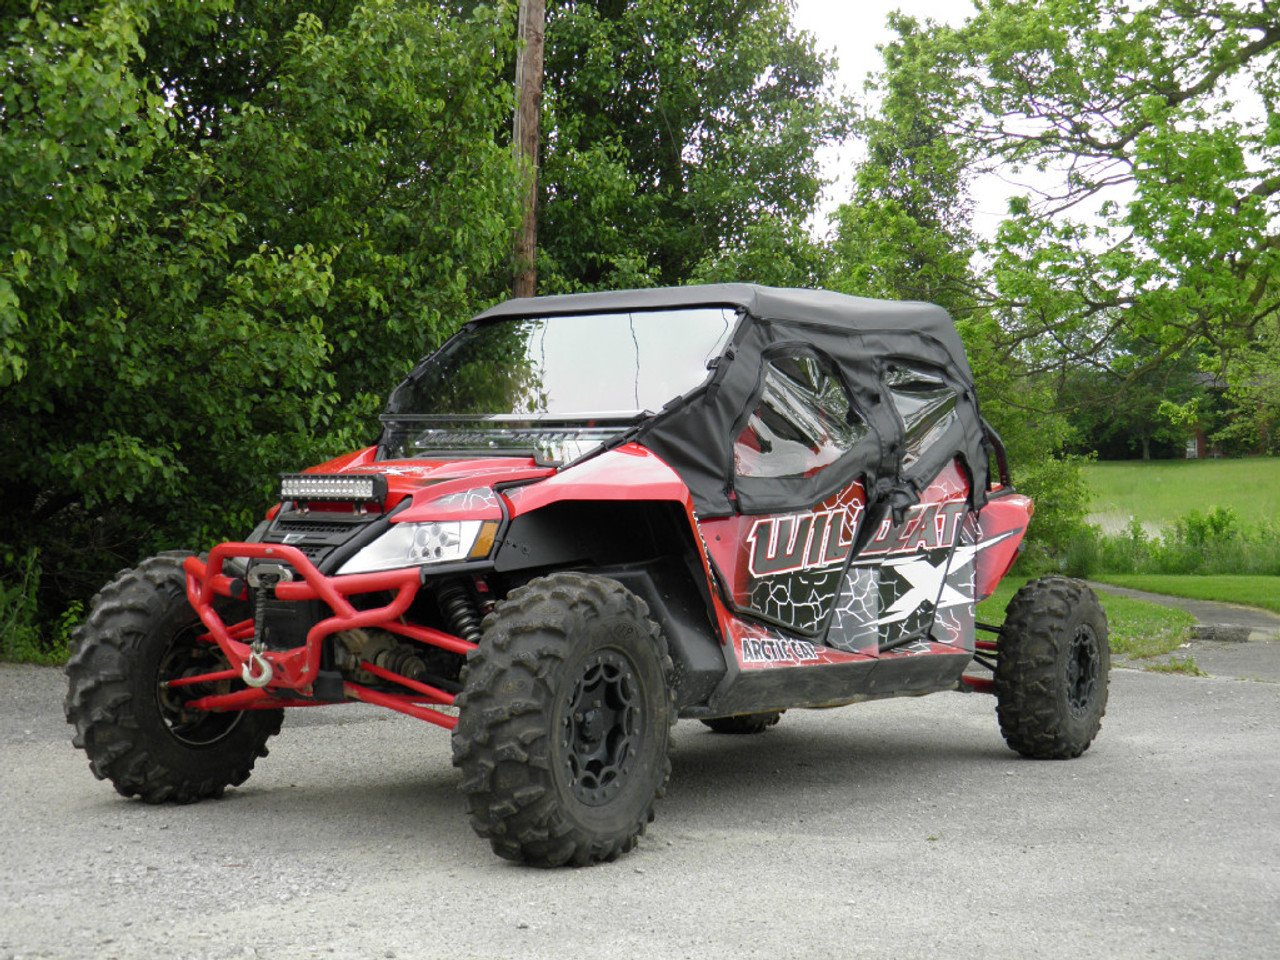 3 Star, side x side, arctic cat, wildcat 4, full cab enclosure front and side angle view